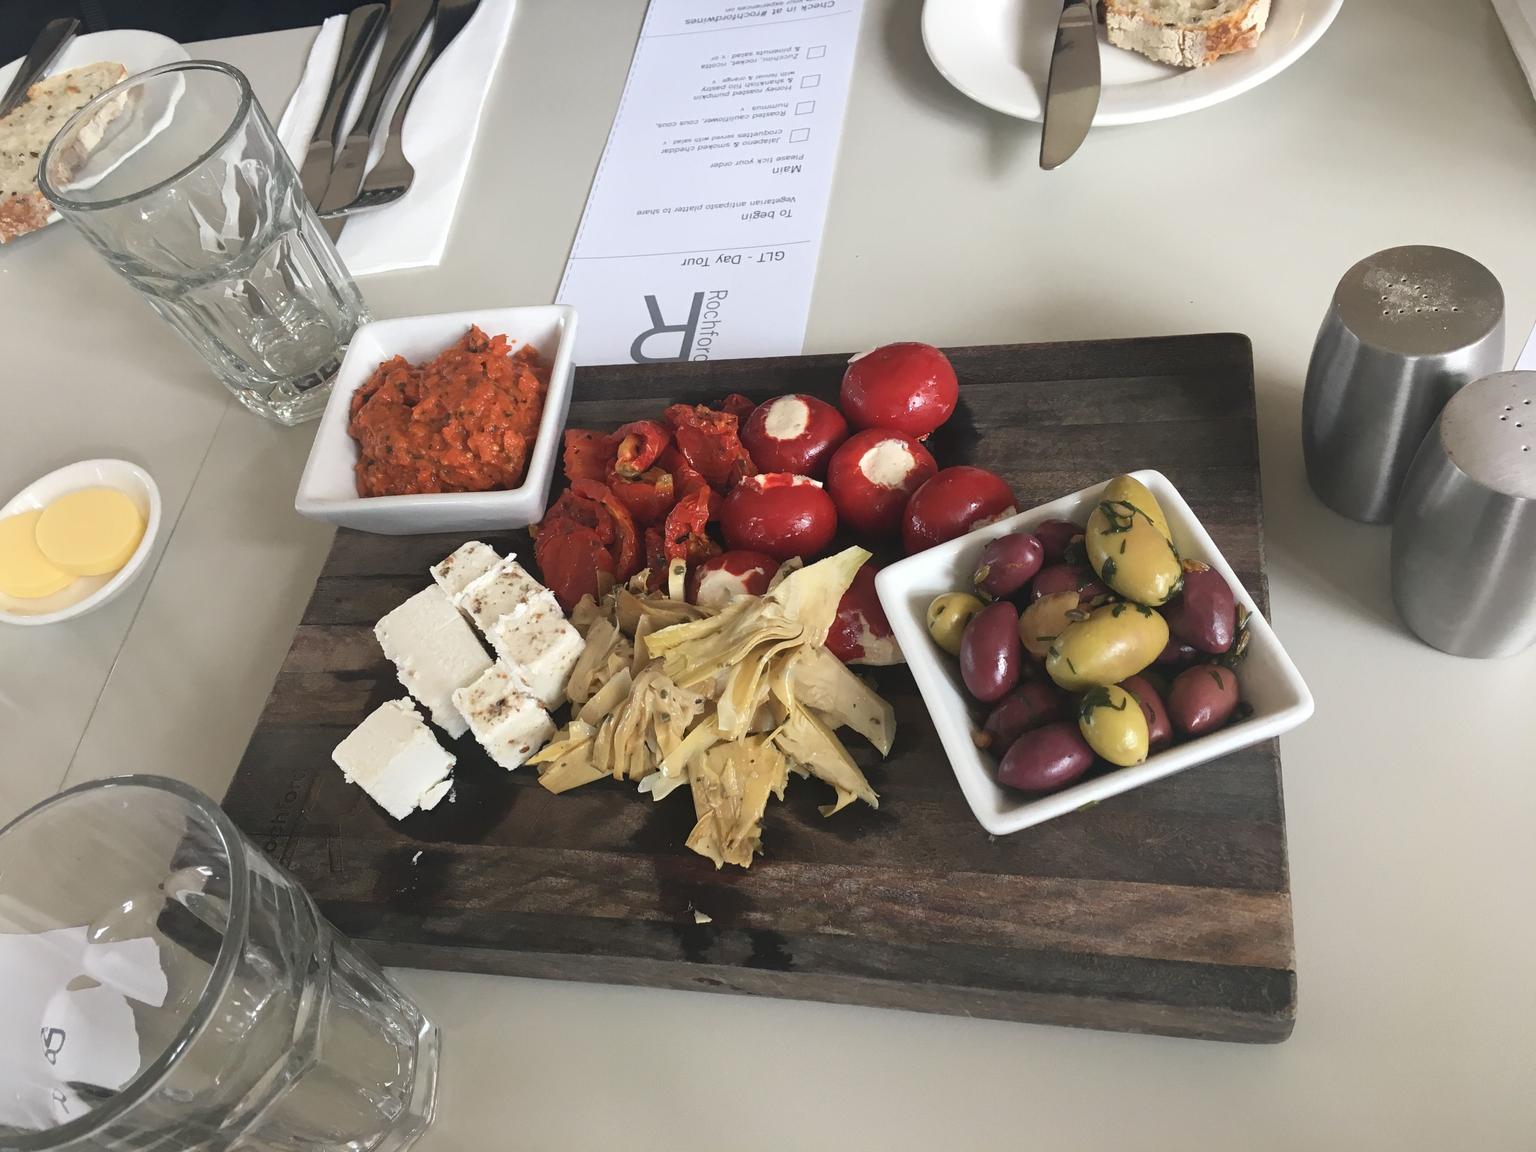 Antipasto at the winery